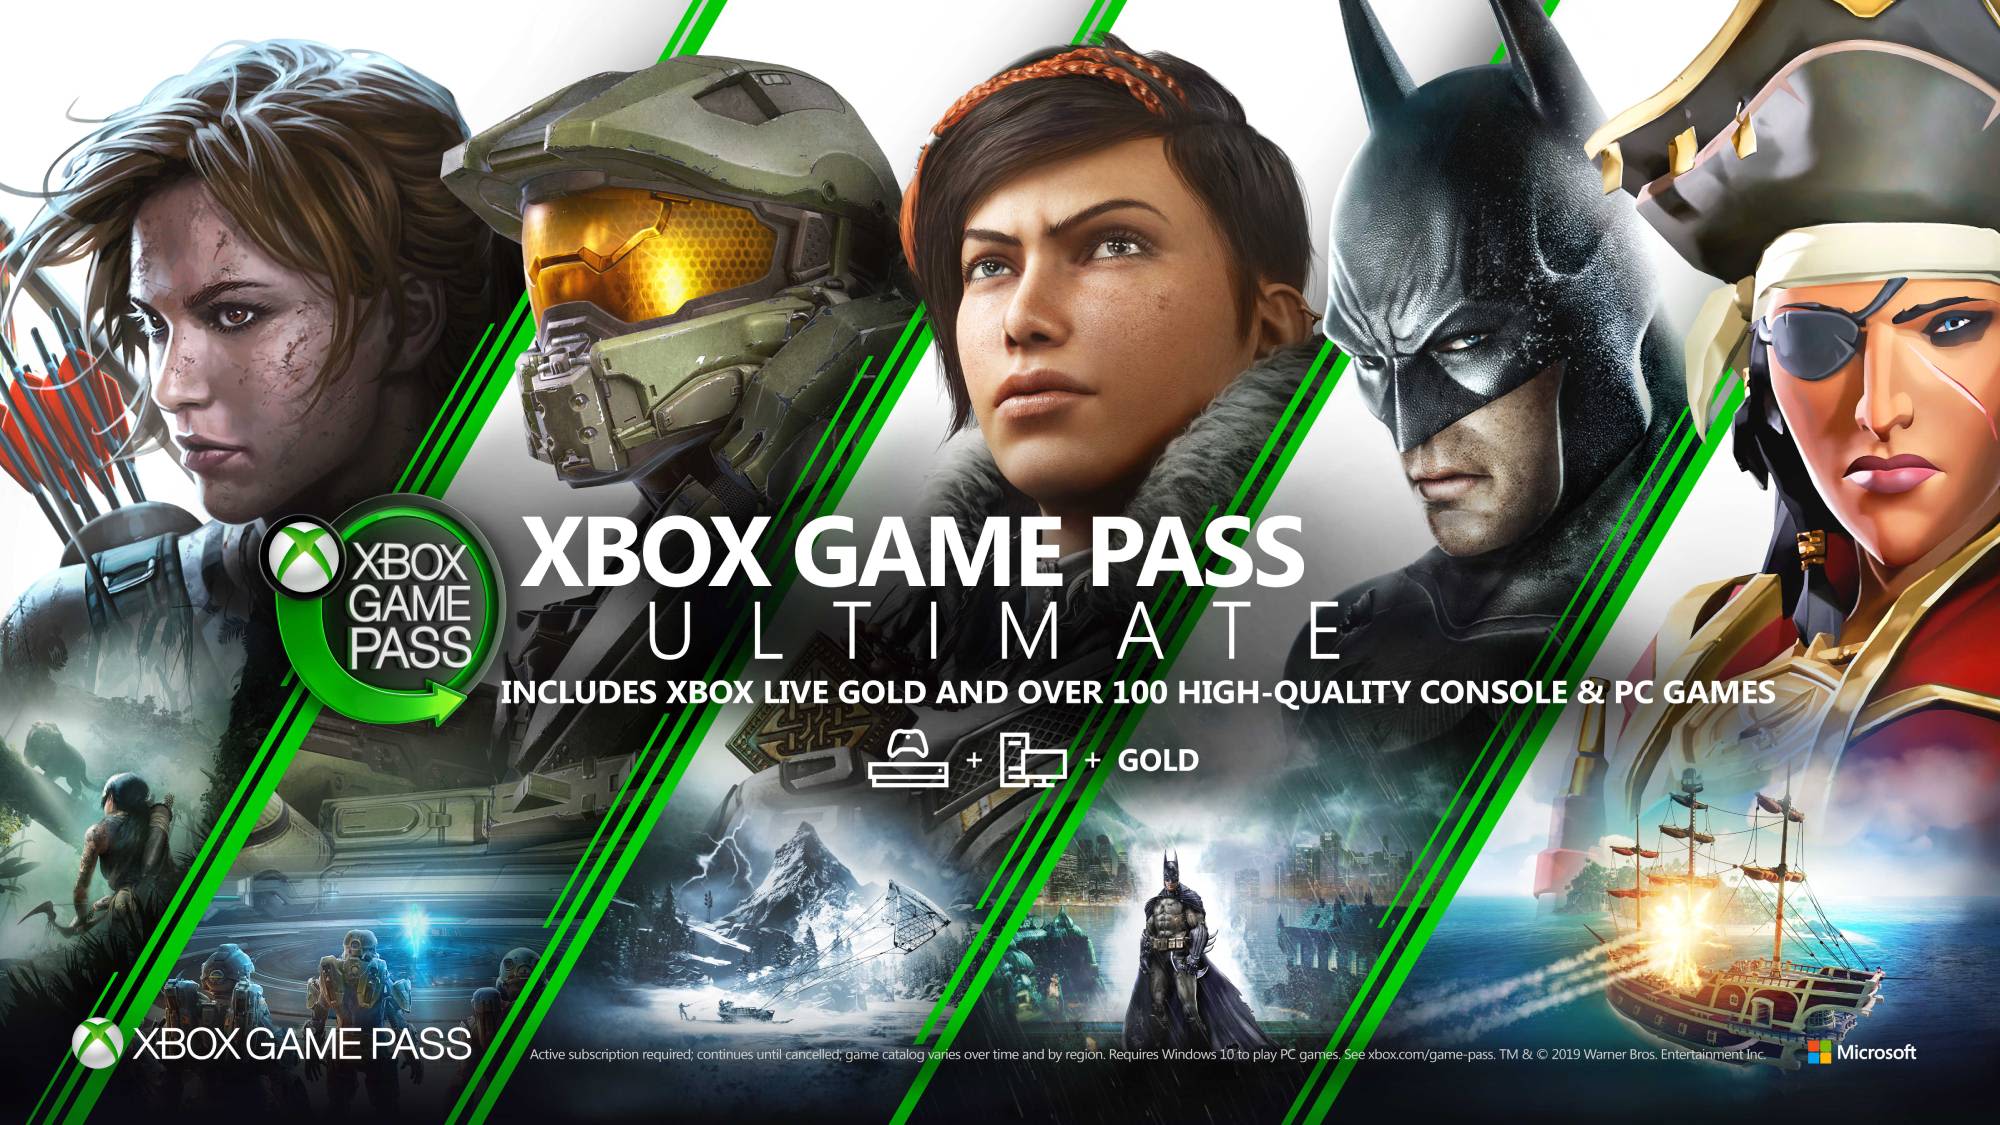 Grant Lurk Prescribe Forget Xbox Series X: Why Xbox Game Pass is all you need | CNN Underscored